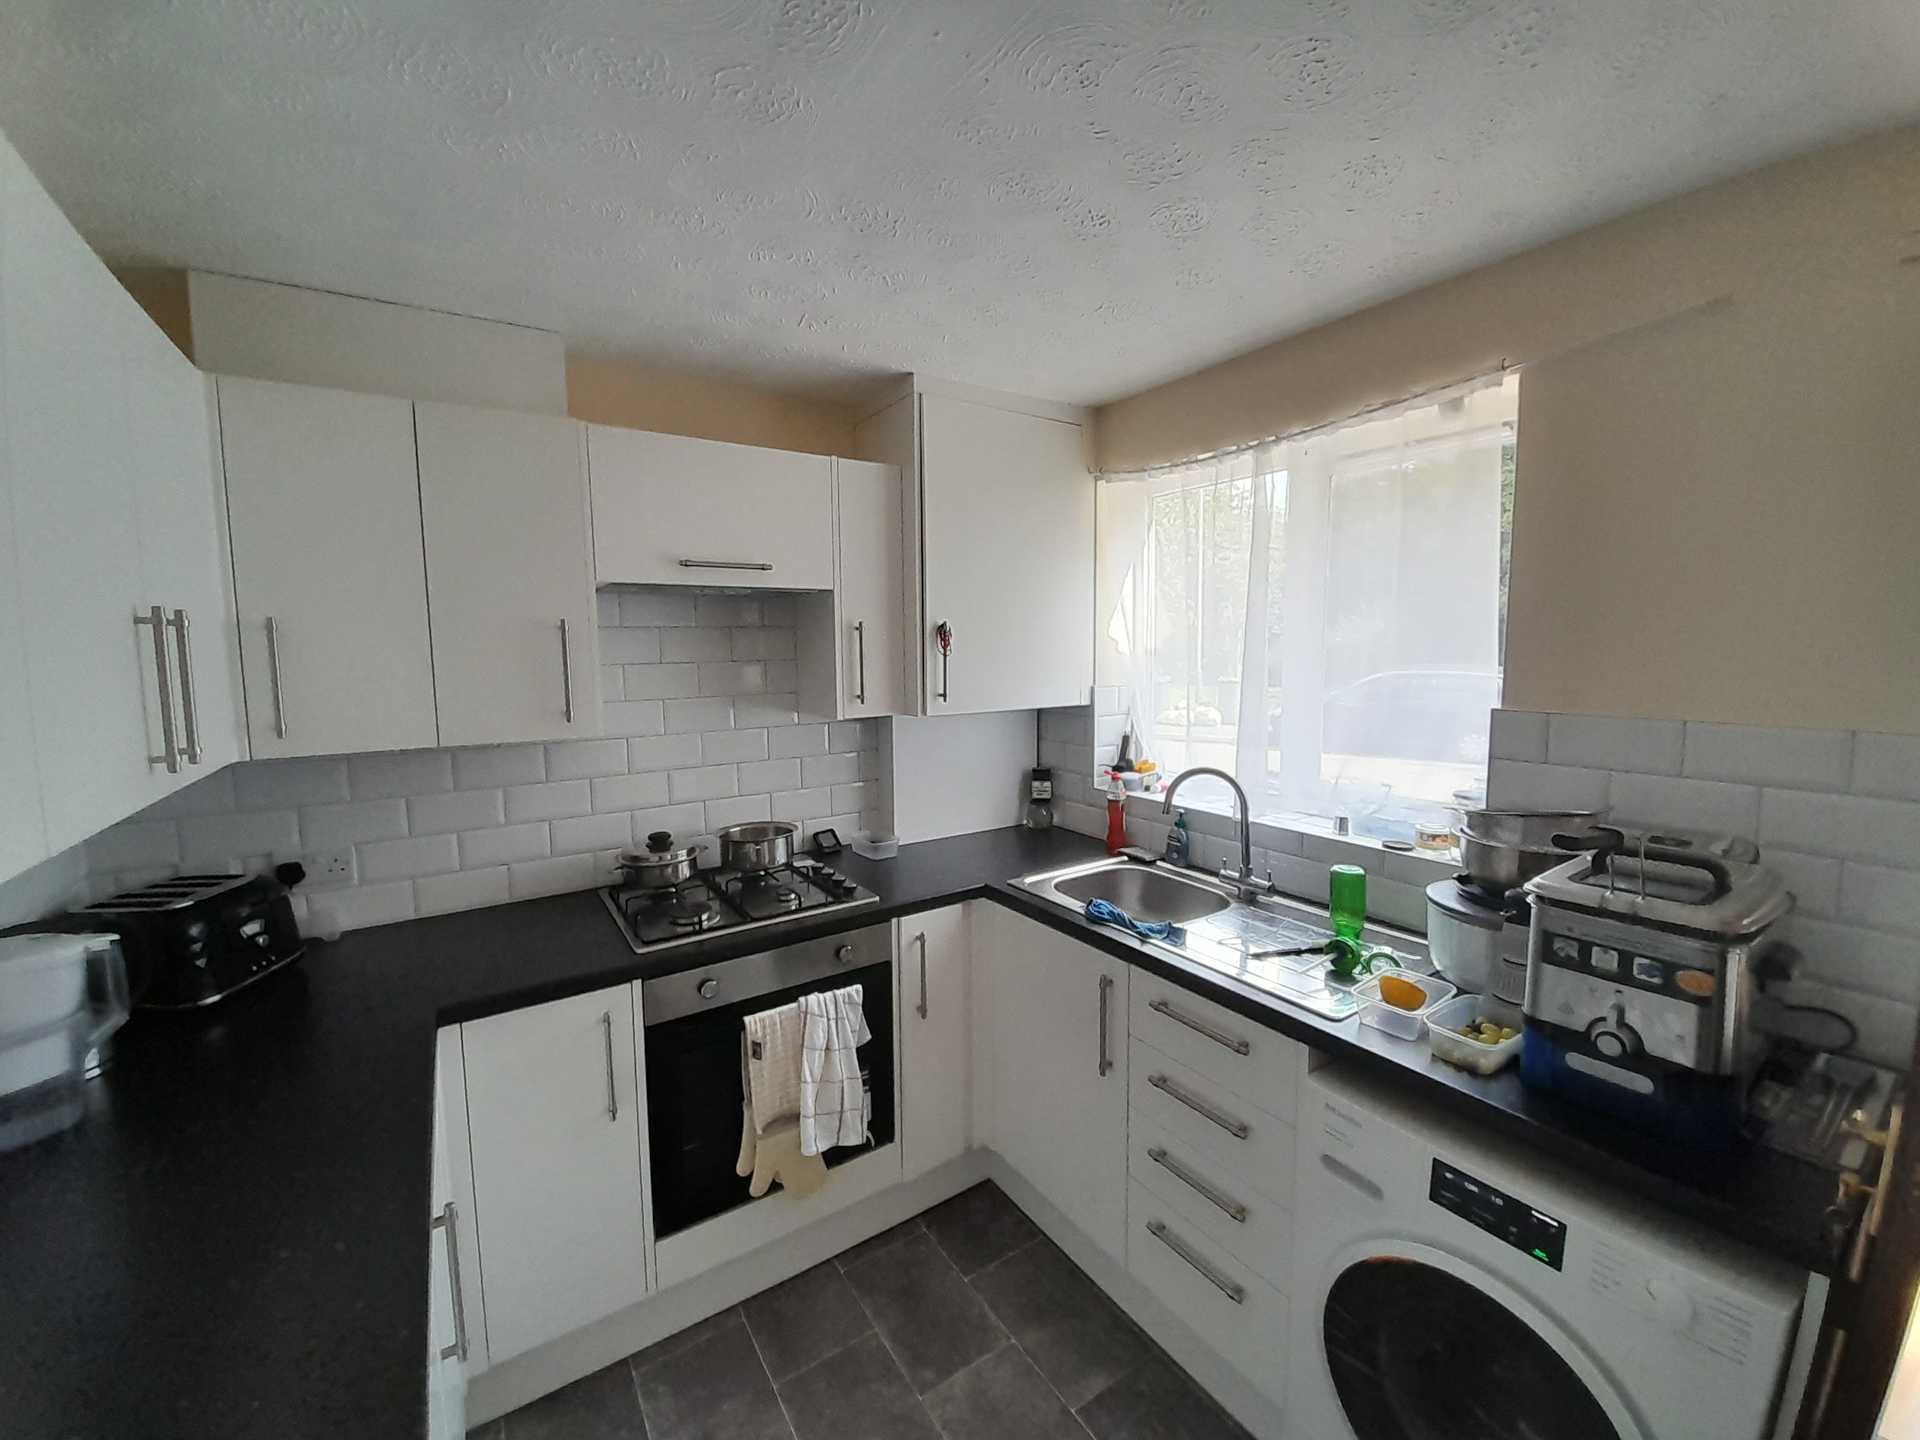 House in Belgrave, Leicester 11124490